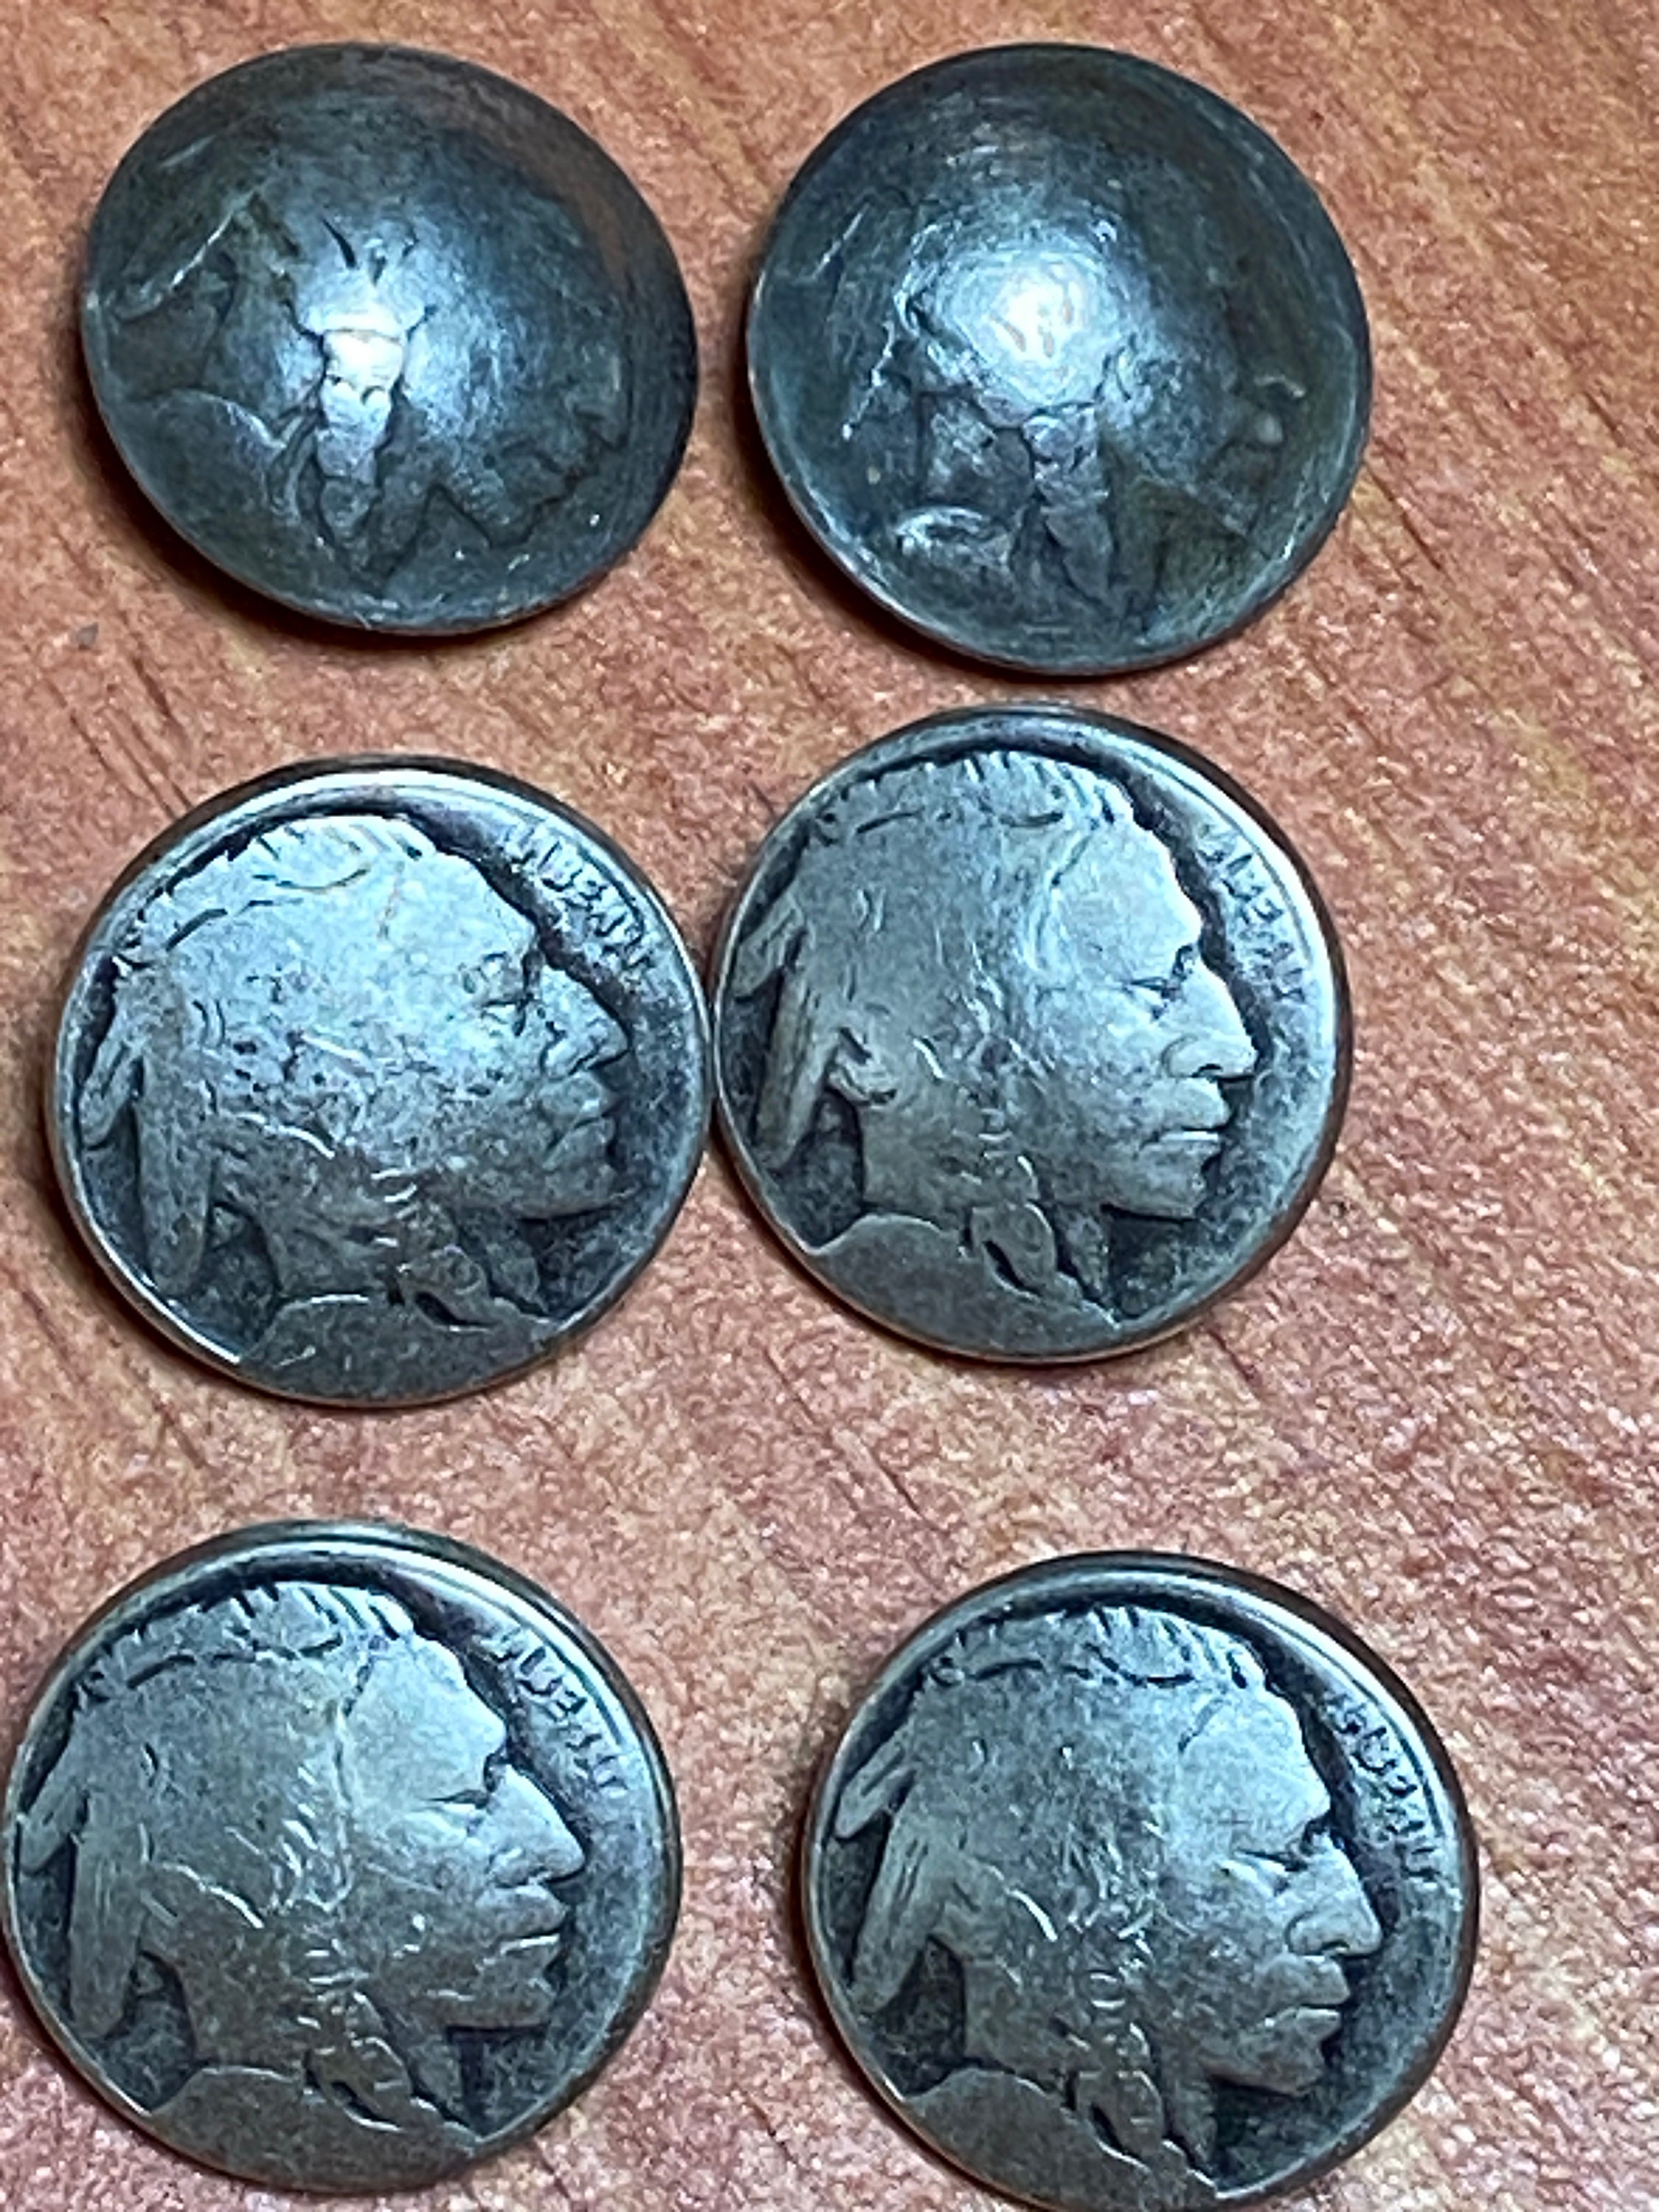 Set 6 Silver Buttons Made from Indian Head Nickels